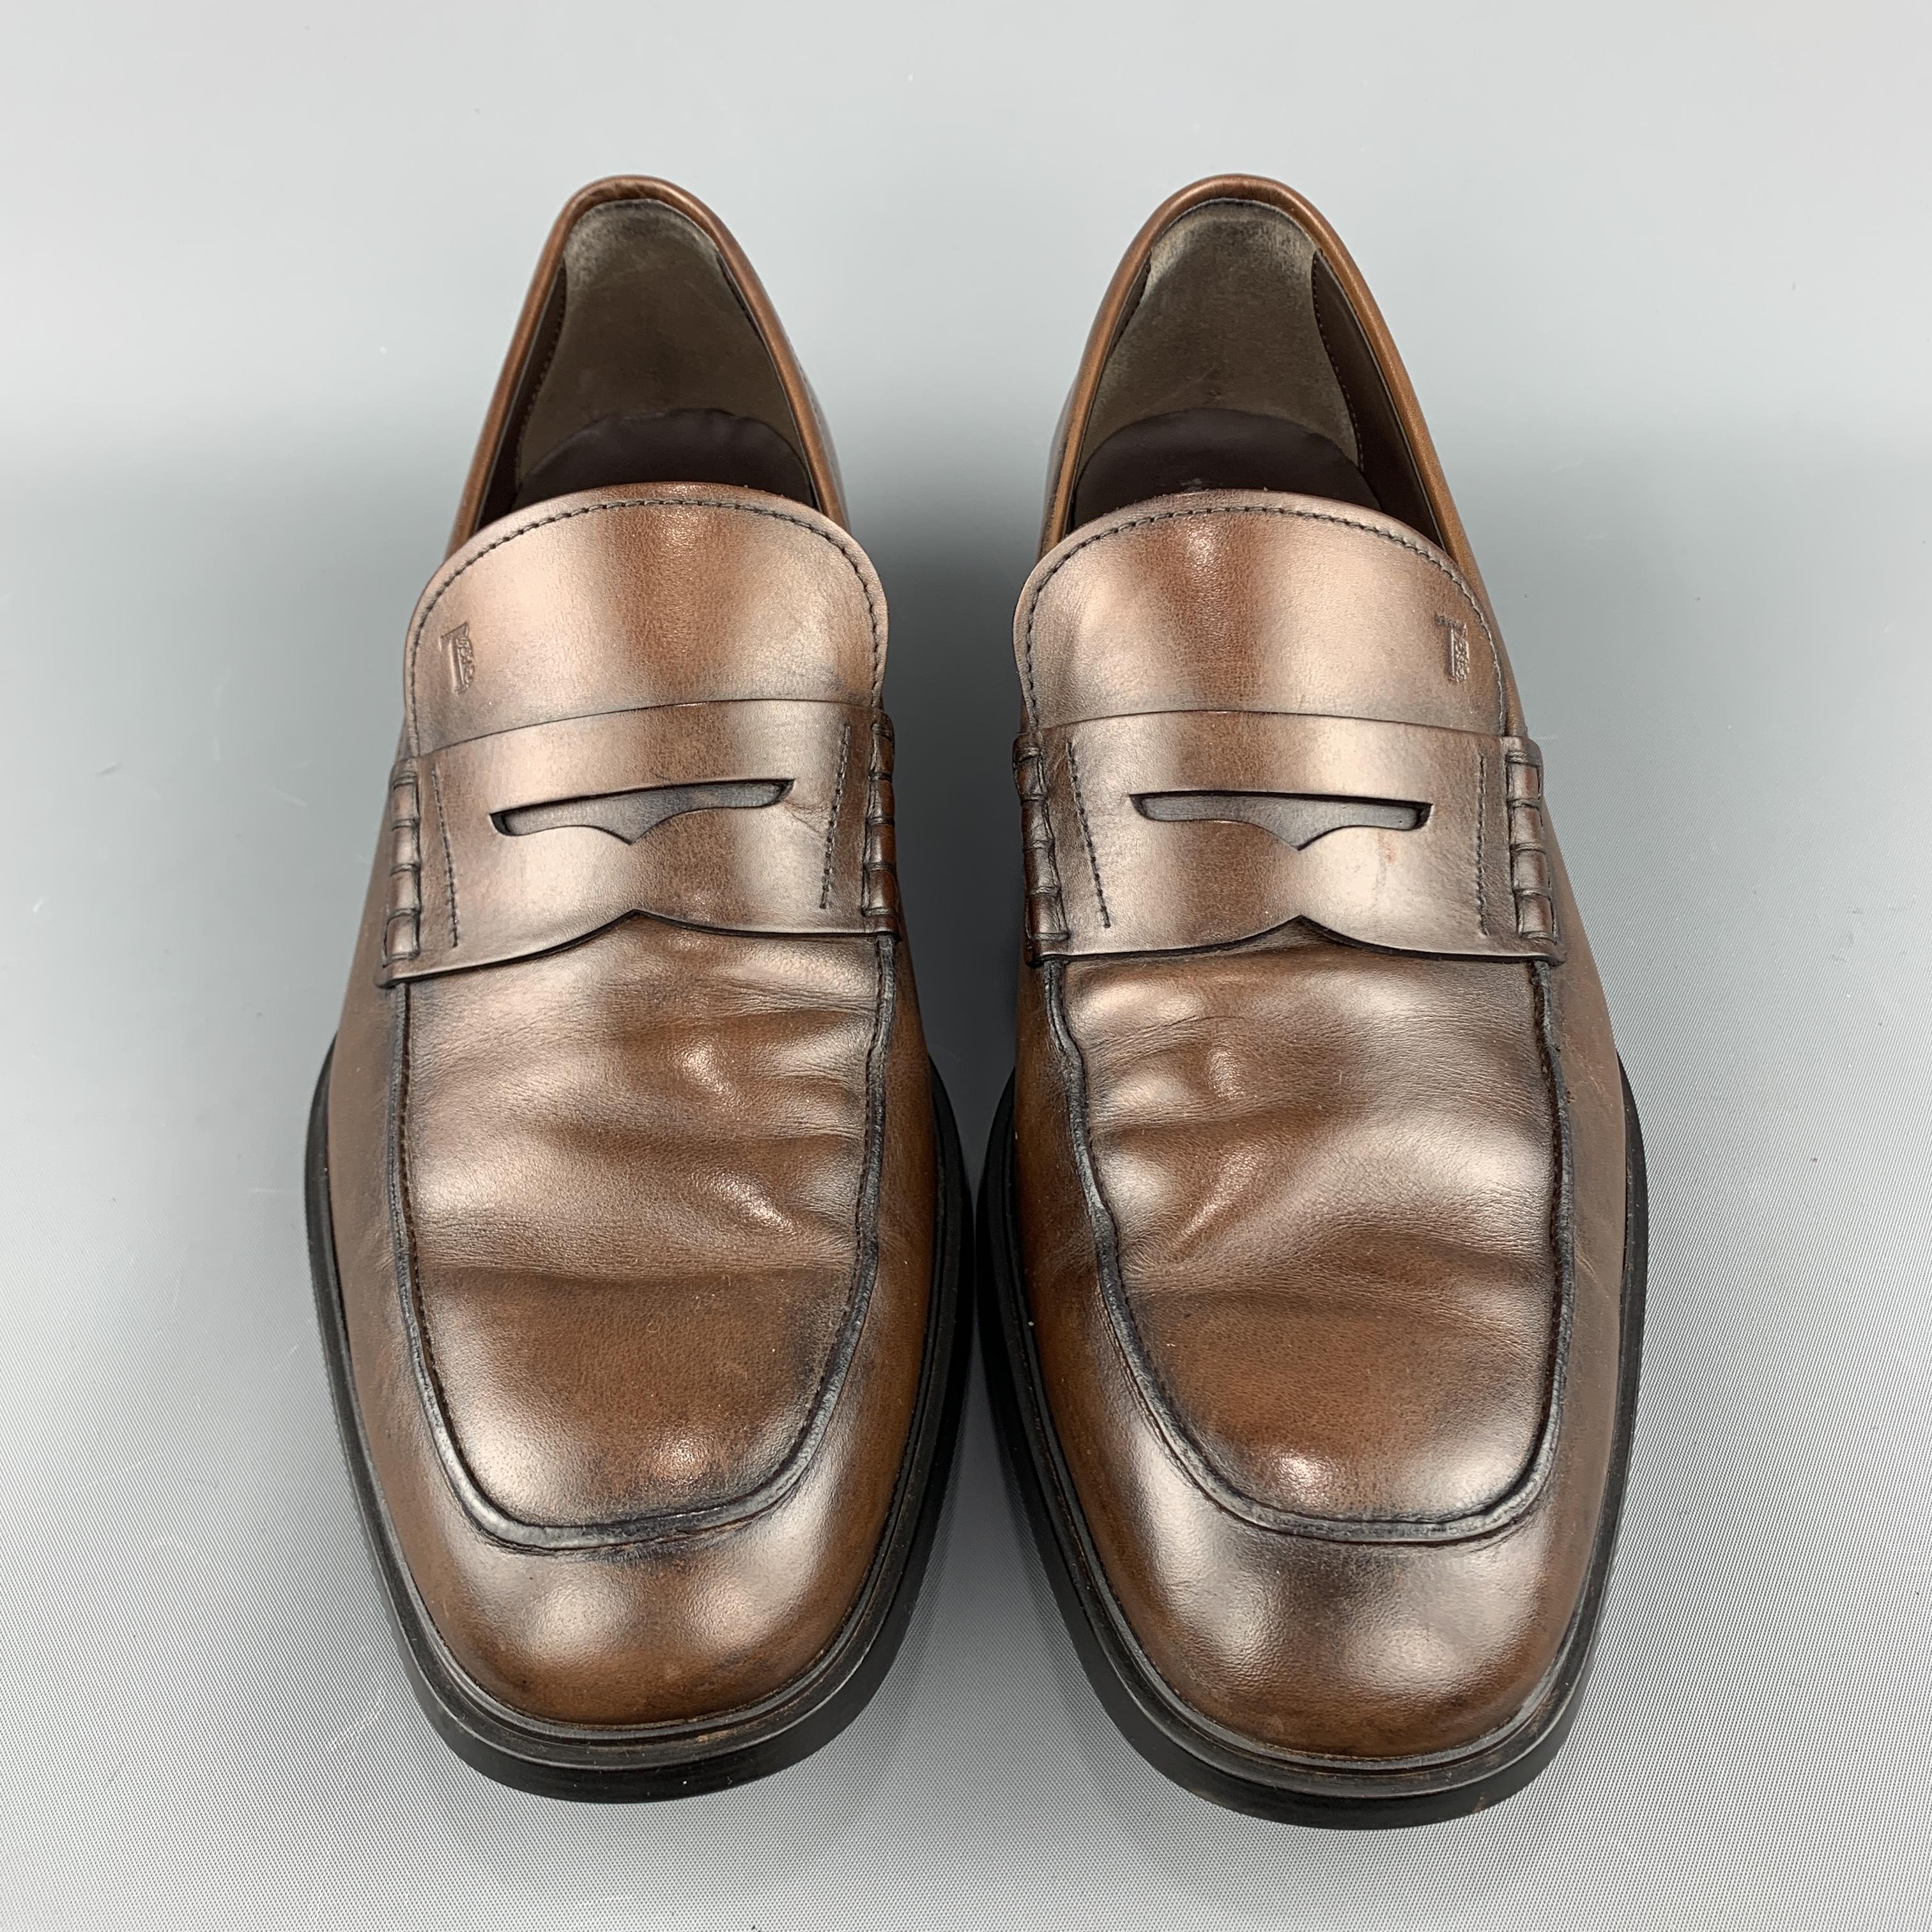 gum sole loafers